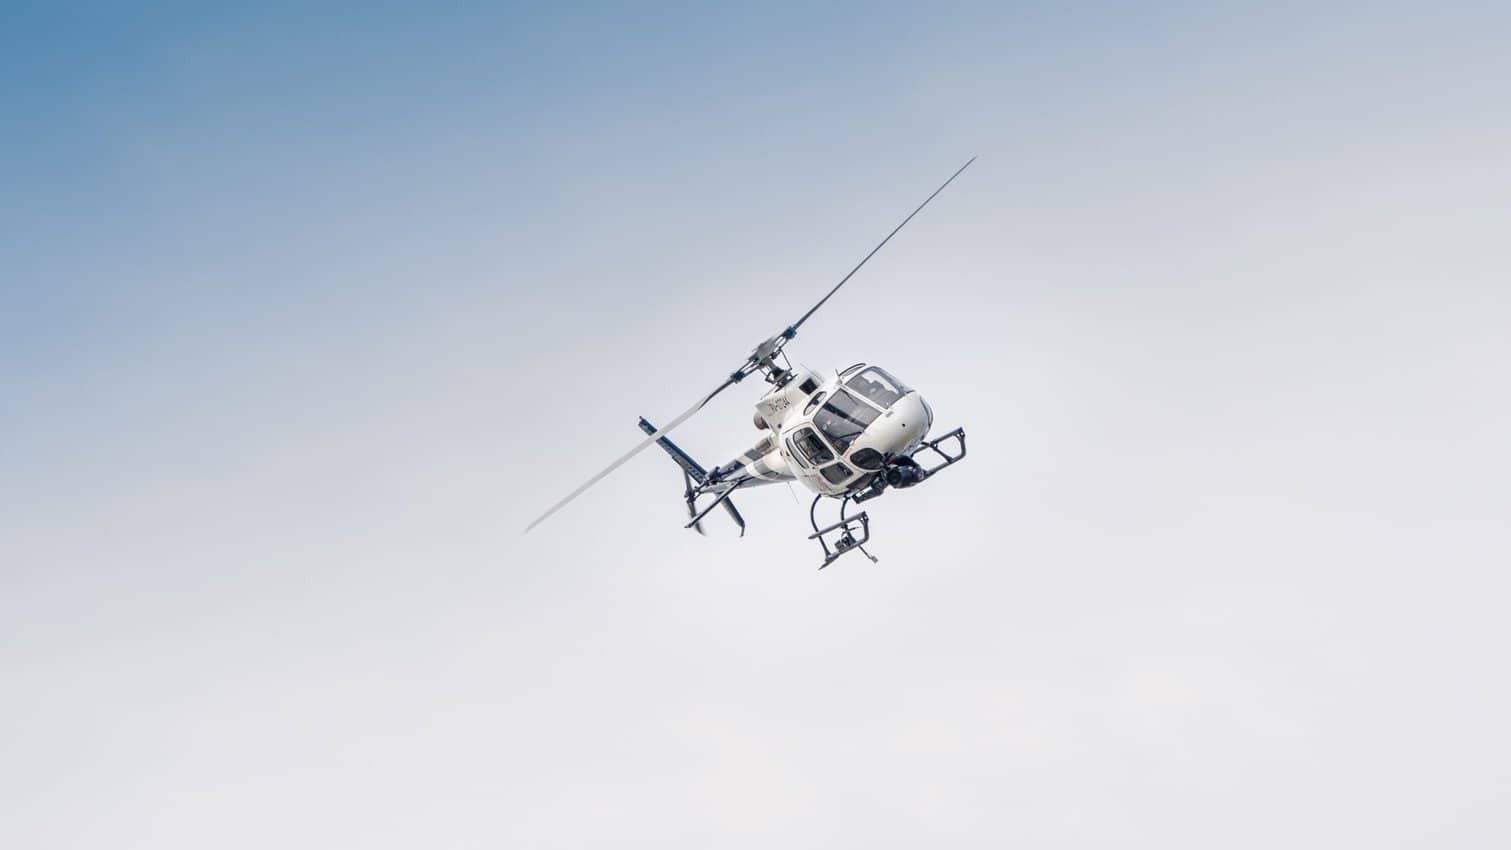 In addition to environmentally friendly airplanes, Blade offers passengers access to helicopters and turbocraft.